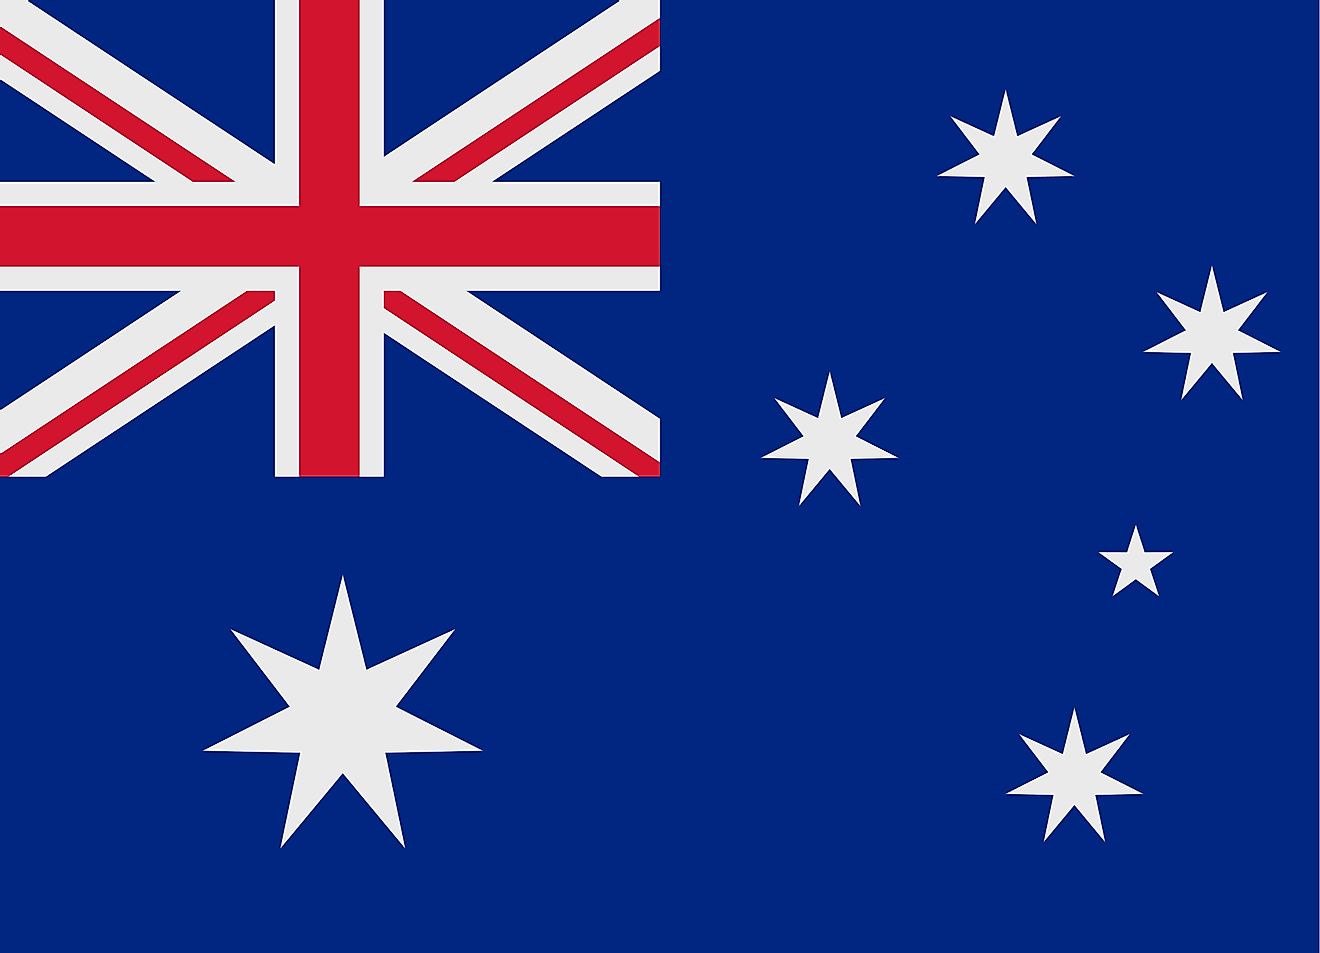 TheThe Australian National Flag consists of a dark blue field and features three primary components namely the Commonwealth Star, the Southern Cross, and the Union Jack. 